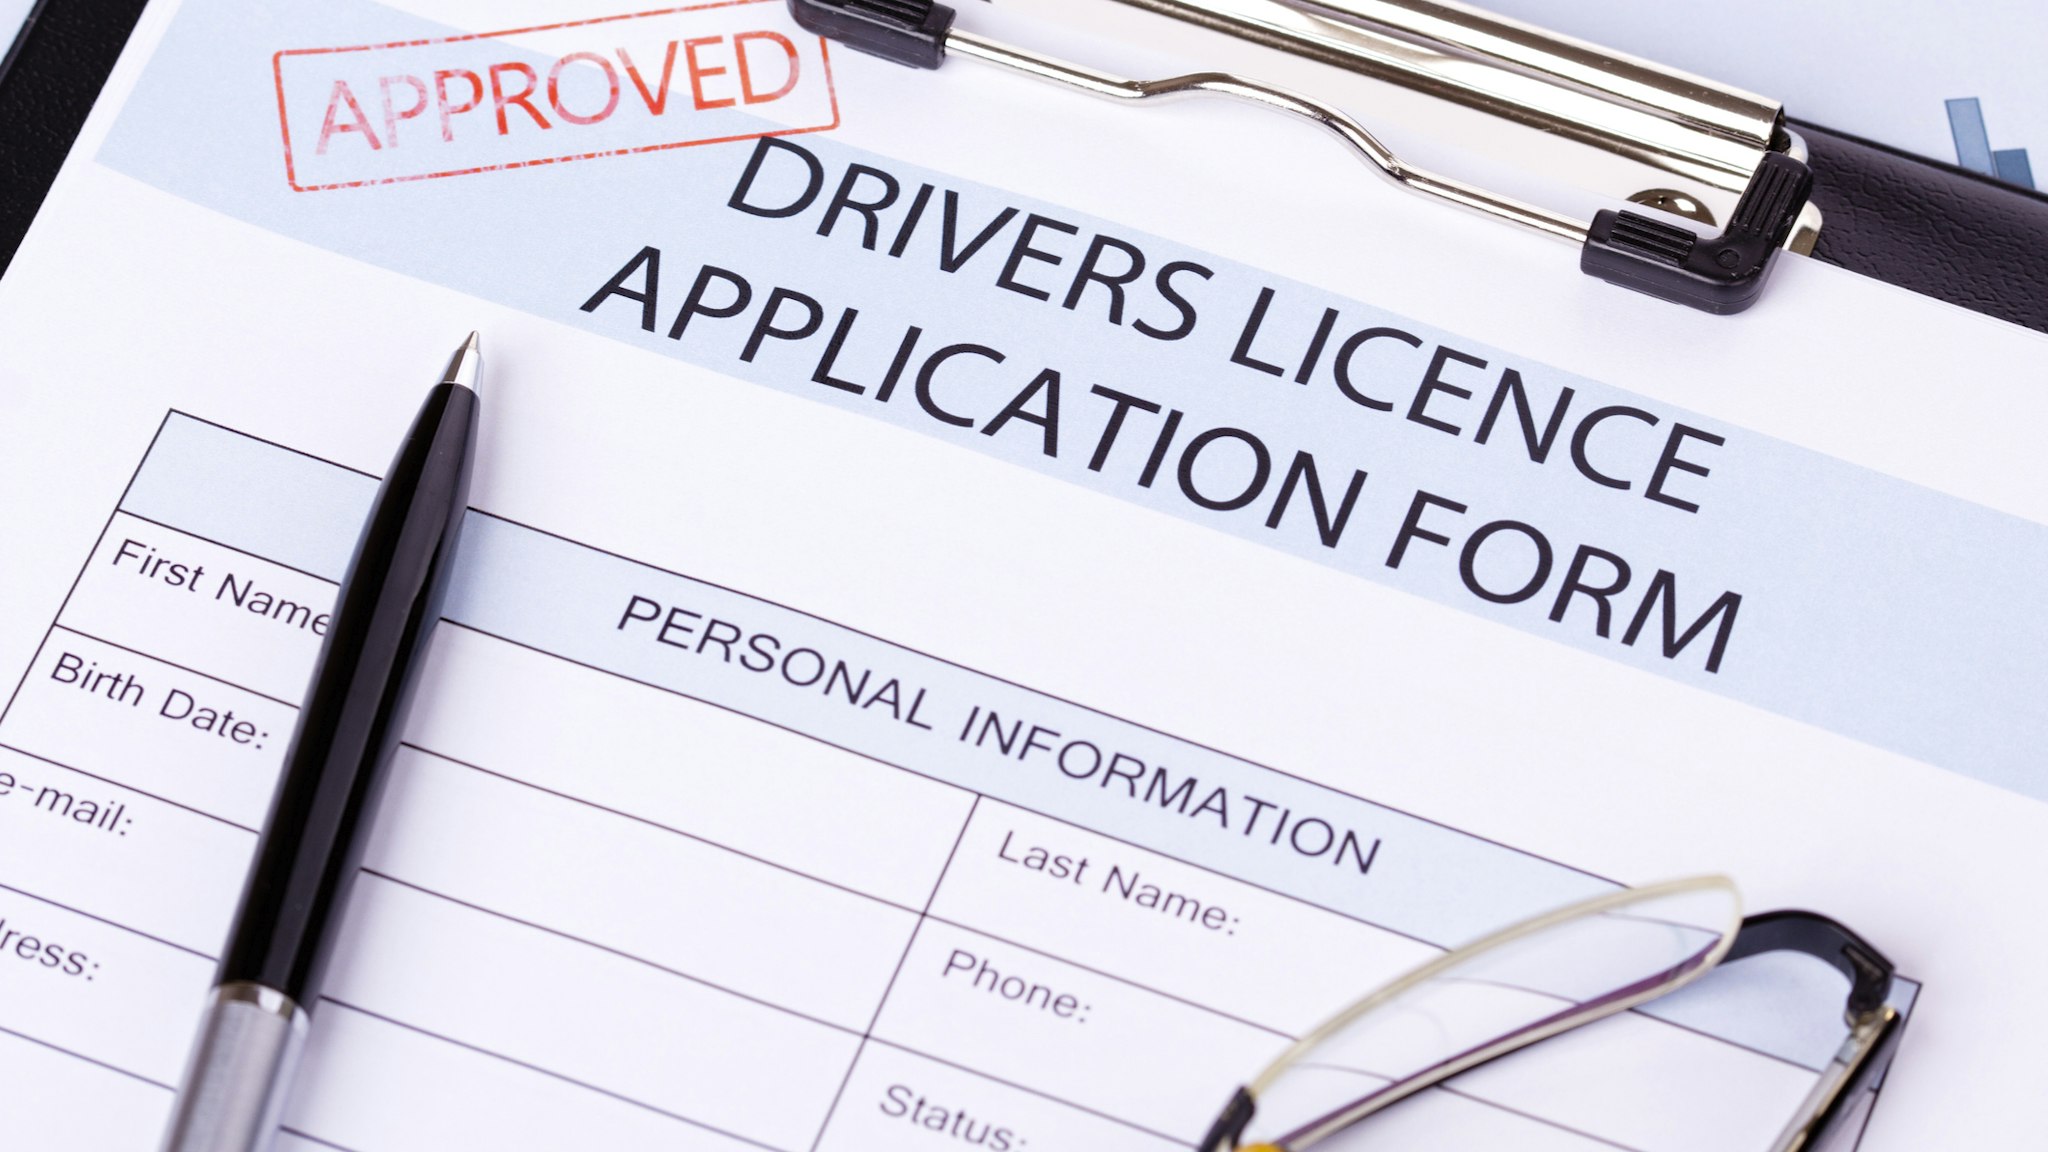 Drivers licence application form approved